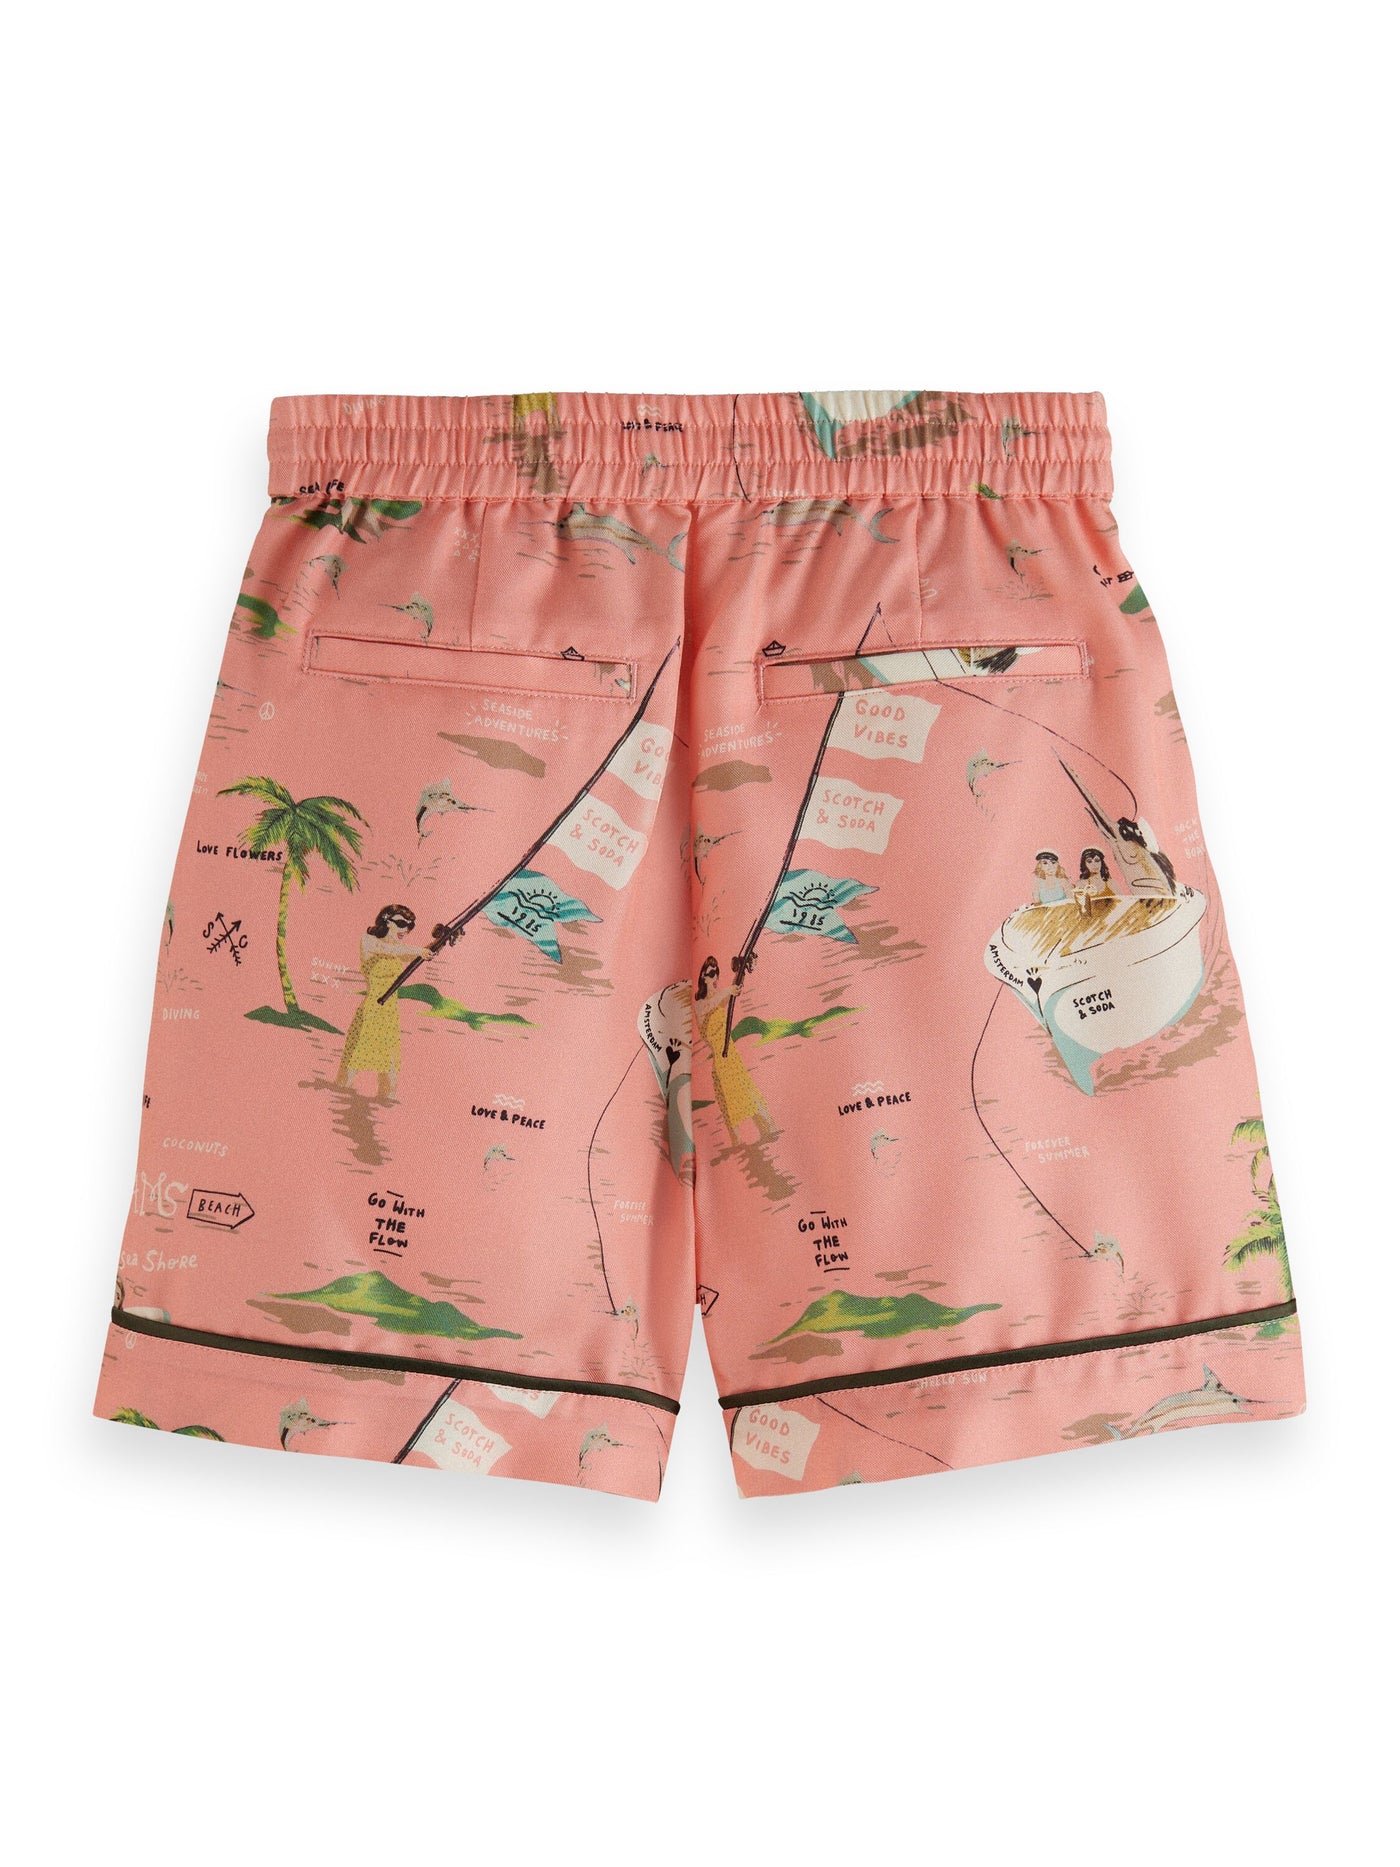 Straight Leg All-Over Printed Shorts